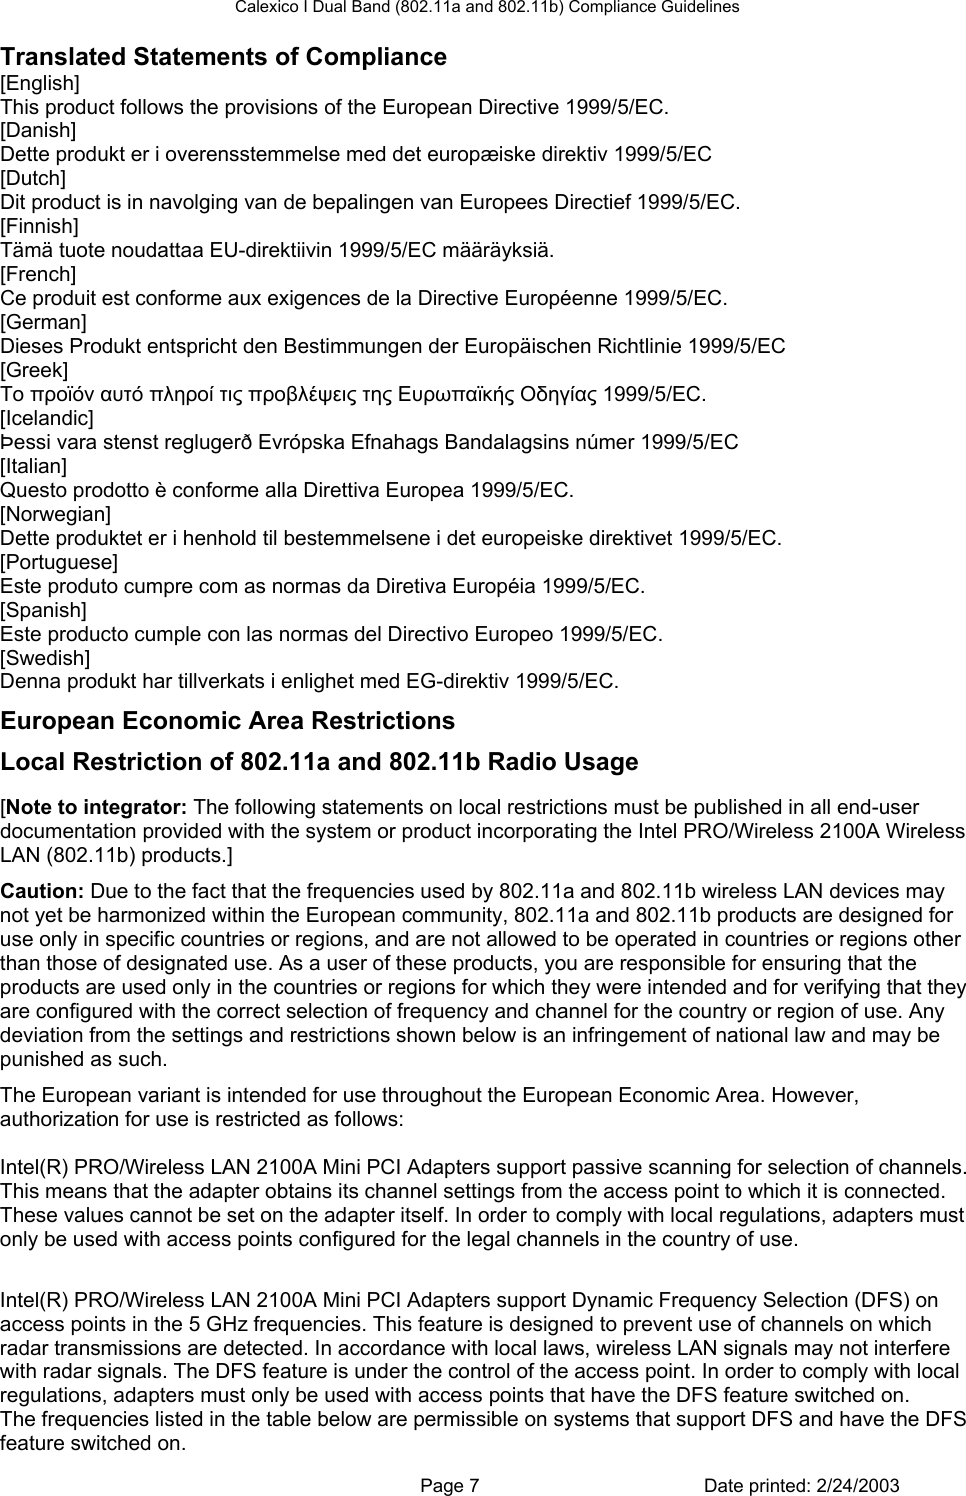 Calexico I Dual Band (802.11a and 802.11b) Compliance Guidelines Translated Statements of Compliance [English] This product follows the provisions of the European Directive 1999/5/EC. [Danish] Dette produkt er i overensstemmelse med det europæiske direktiv 1999/5/EC [Dutch] Dit product is in navolging van de bepalingen van Europees Directief 1999/5/EC. [Finnish] Tämä tuote noudattaa EU-direktiivin 1999/5/EC määräyksiä. [French] Ce produit est conforme aux exigences de la Directive Européenne 1999/5/EC. [German] Dieses Produkt entspricht den Bestimmungen der Europäischen Richtlinie 1999/5/EC [Greek] Το προϊόν αυτό πληροί τις προβλέψεις της Ευρωπαϊκής Οδηγίας 1999/5/ΕC. [Icelandic] Þessi vara stenst reglugerð Evrópska Efnahags Bandalagsins númer 1999/5/EC [Italian] Questo prodotto è conforme alla Direttiva Europea 1999/5/EC. [Norwegian] Dette produktet er i henhold til bestemmelsene i det europeiske direktivet 1999/5/EC. [Portuguese] Este produto cumpre com as normas da Diretiva Européia 1999/5/EC. [Spanish] Este producto cumple con las normas del Directivo Europeo 1999/5/EC. [Swedish] Denna produkt har tillverkats i enlighet med EG-direktiv 1999/5/EC. European Economic Area Restrictions Local Restriction of 802.11a and 802.11b Radio Usage  [Note to integrator: The following statements on local restrictions must be published in all end-user documentation provided with the system or product incorporating the Intel PRO/Wireless 2100A Wireless LAN (802.11b) products.] Caution: Due to the fact that the frequencies used by 802.11a and 802.11b wireless LAN devices may not yet be harmonized within the European community, 802.11a and 802.11b products are designed for use only in specific countries or regions, and are not allowed to be operated in countries or regions other than those of designated use. As a user of these products, you are responsible for ensuring that the products are used only in the countries or regions for which they were intended and for verifying that they are configured with the correct selection of frequency and channel for the country or region of use. Any deviation from the settings and restrictions shown below is an infringement of national law and may be punished as such. The European variant is intended for use throughout the European Economic Area. However, authorization for use is restricted as follows: Passive Scanning Adapters and Access Points Intel(R) PRO/Wireless LAN 2100A Mini PCI Adapters support passive scanning for selection of channels. This means that the adapter obtains its channel settings from the access point to which it is connected. These values cannot be set on the adapter itself. In order to comply with local regulations, adapters must only be used with access points configured for the legal channels in the country of use. Dynamic Frequency Selection (DFS) Intel(R) PRO/Wireless LAN 2100A Mini PCI Adapters support Dynamic Frequency Selection (DFS) on access points in the 5 GHz frequencies. This feature is designed to prevent use of channels on which radar transmissions are detected. In accordance with local laws, wireless LAN signals may not interfere with radar signals. The DFS feature is under the control of the access point. In order to comply with local regulations, adapters must only be used with access points that have the DFS feature switched on. The frequencies listed in the table below are permissible on systems that support DFS and have the DFS feature switched on.   Page 7  Date printed: 2/24/2003 